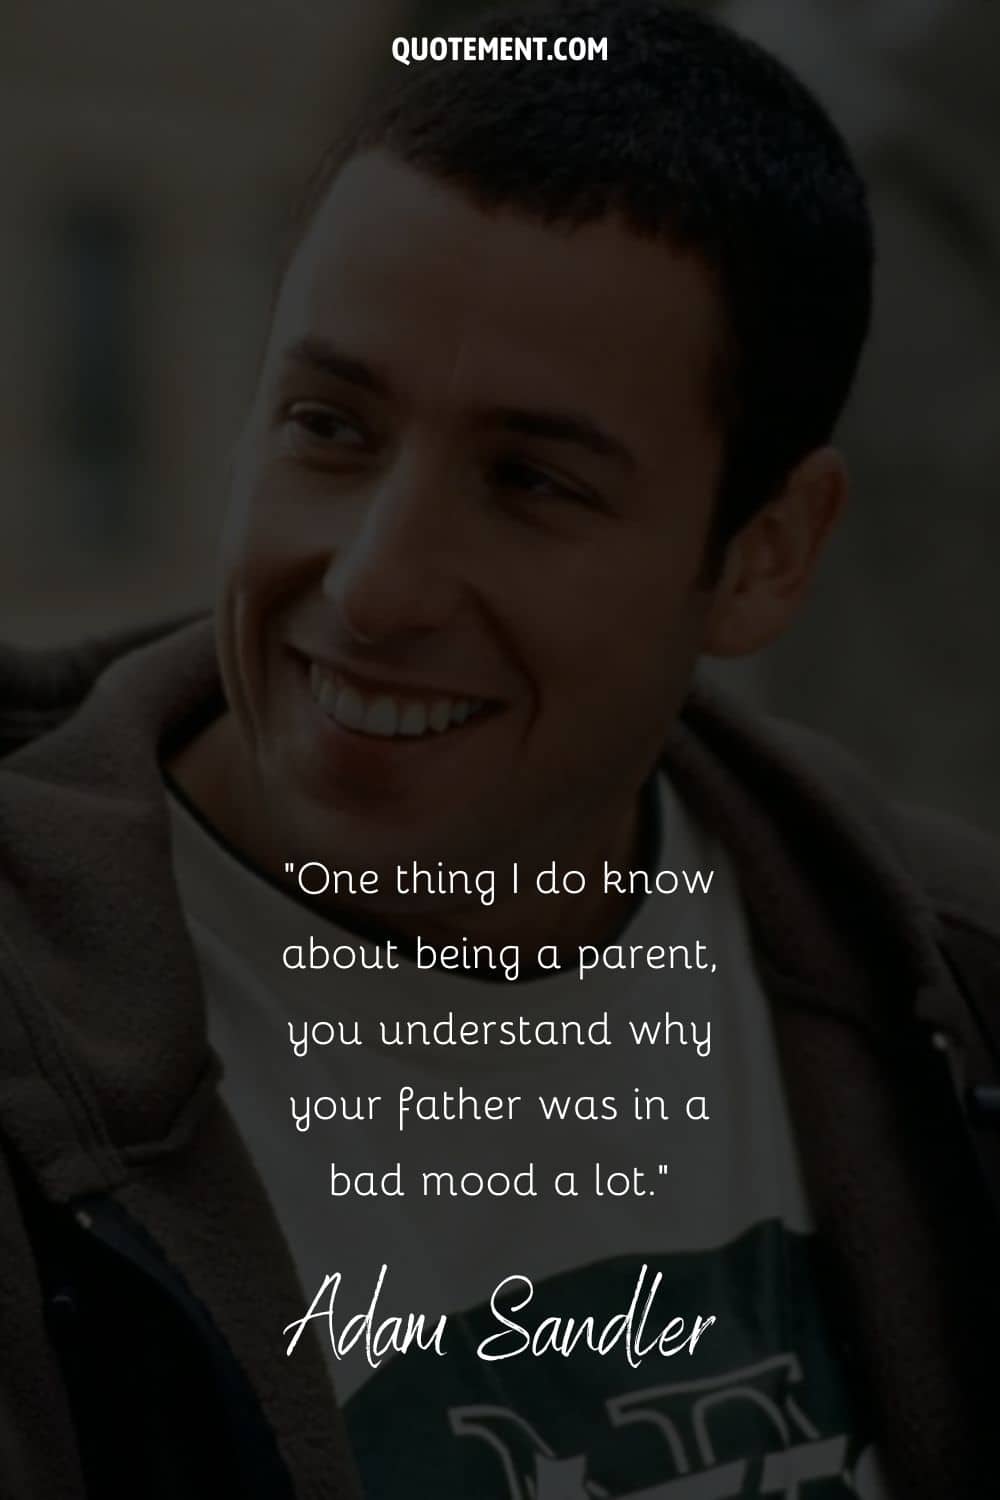 Adam Sandler quote on being a parent